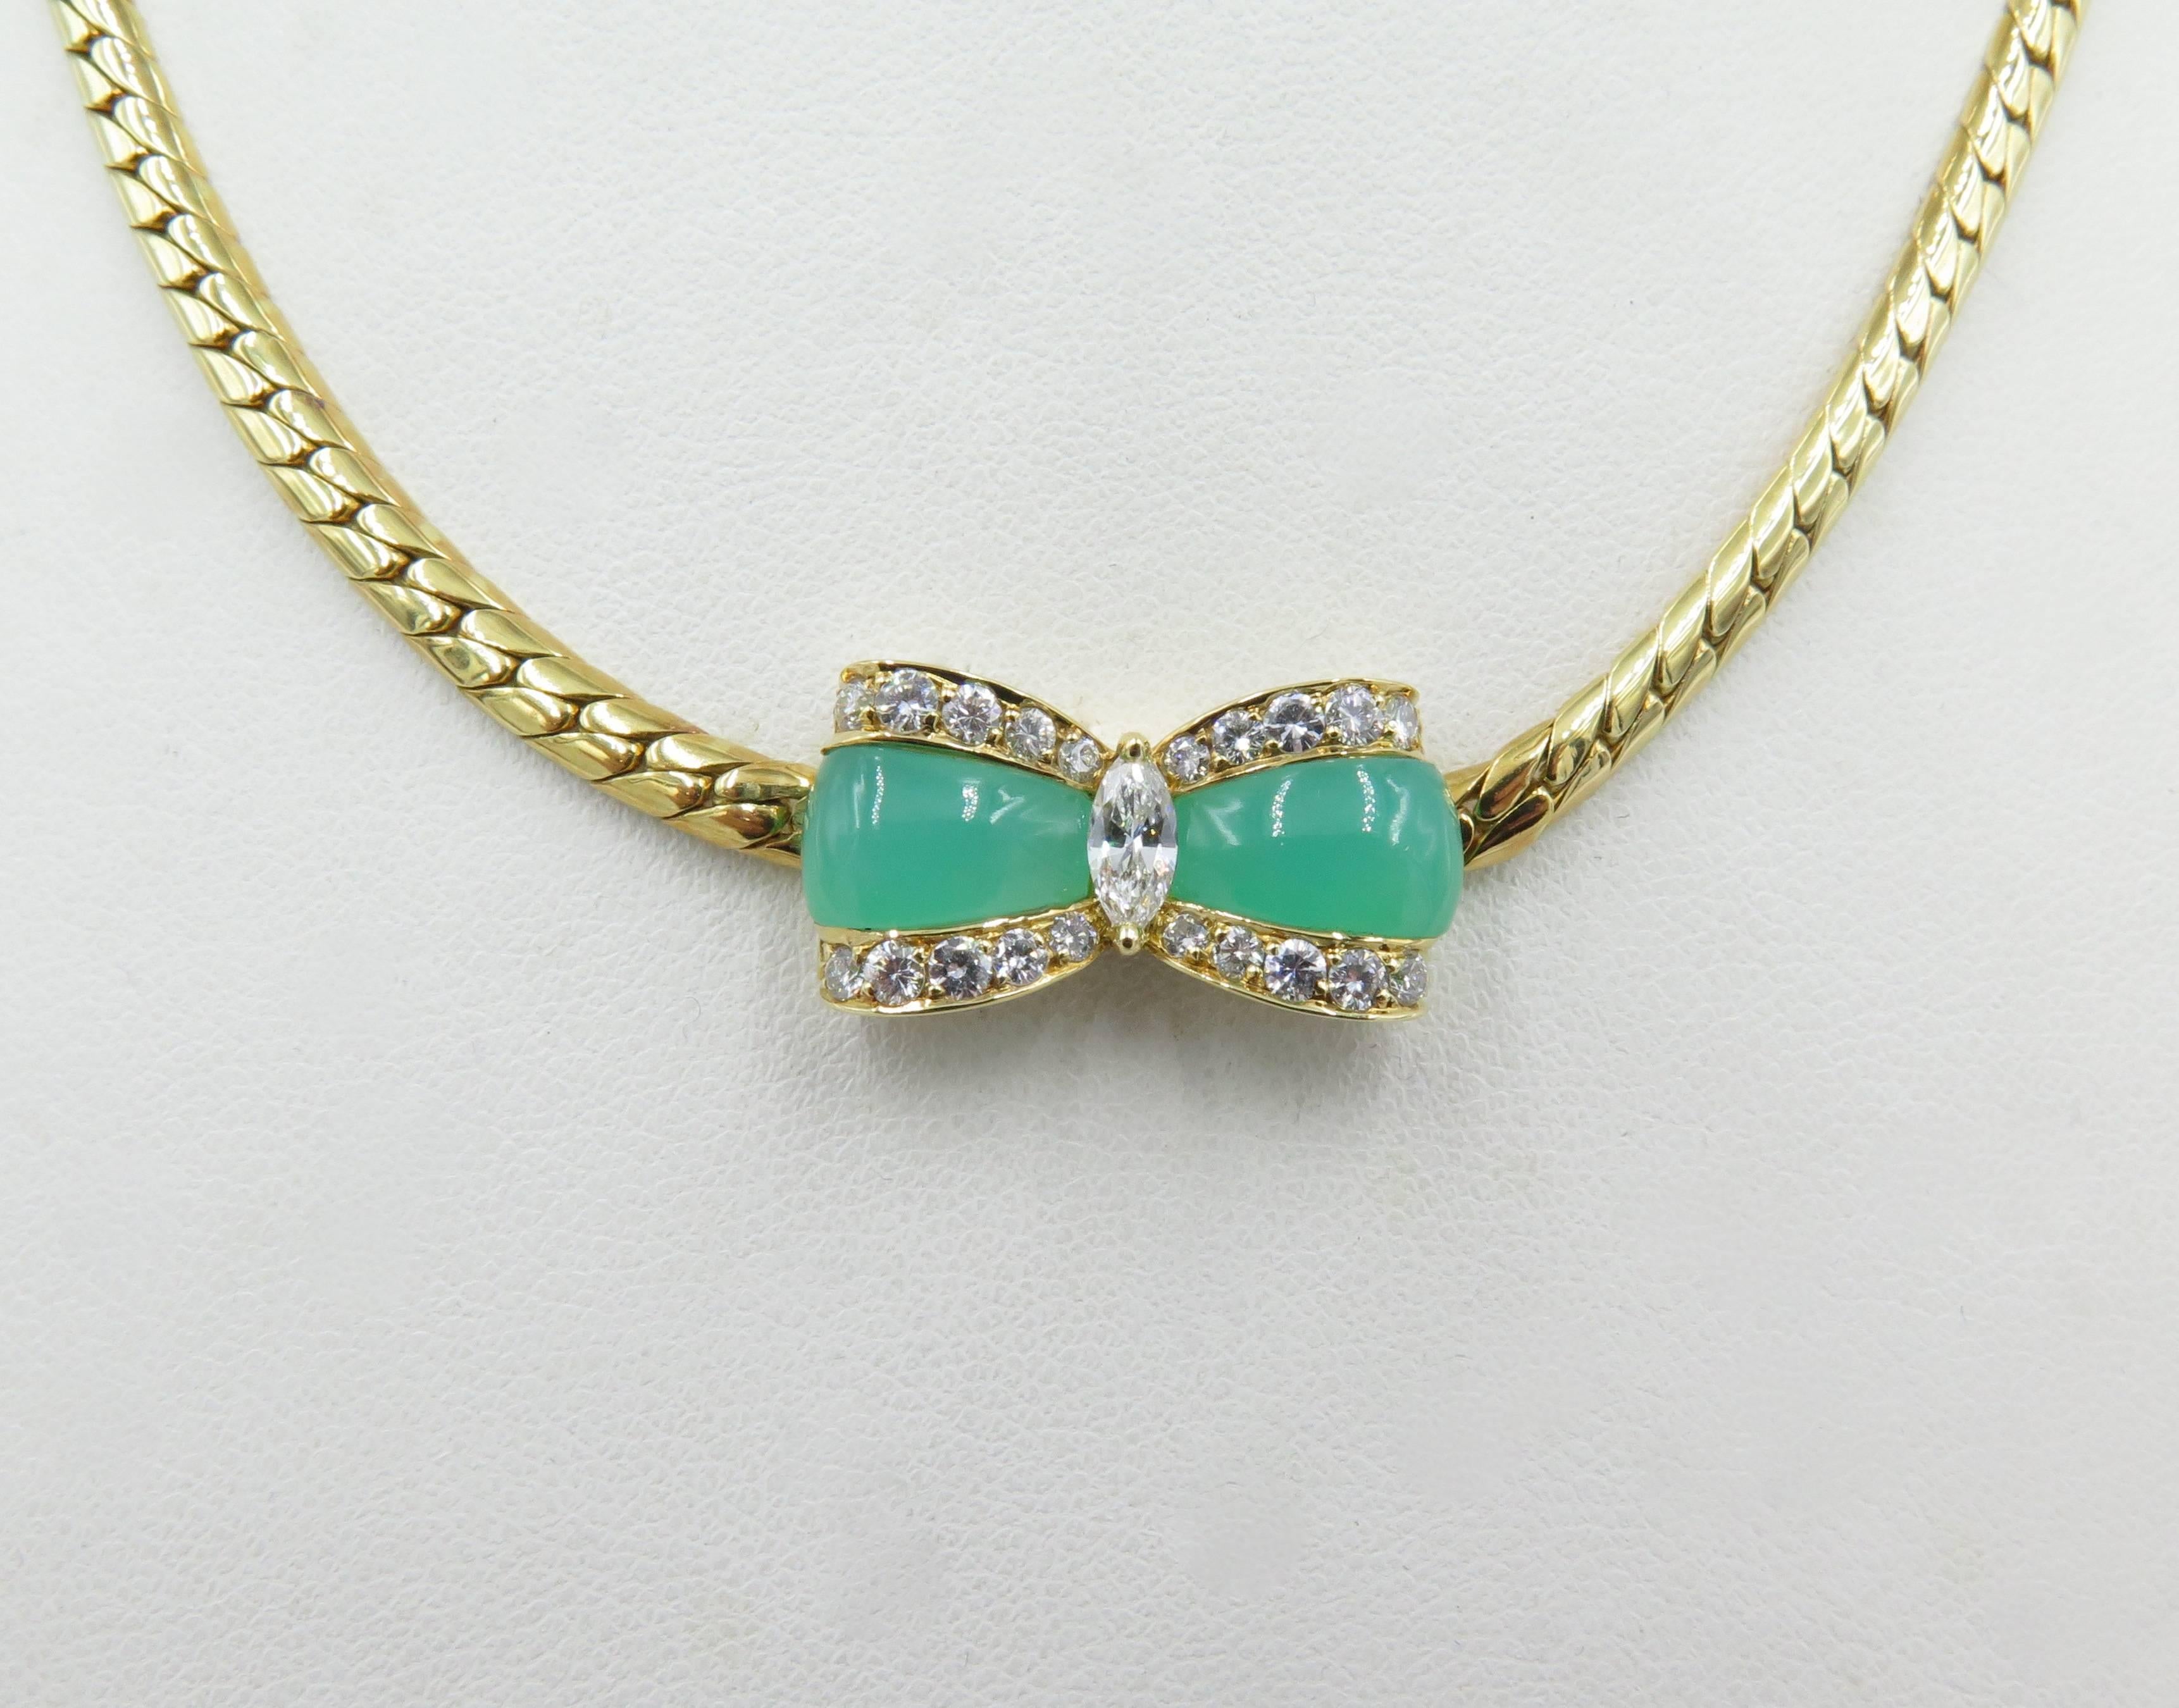 An 18 karat yellow gold, chrysoprase and diamond necklace. Van Cleef and Arpels. French. Designed as a flat link chain, centering a chrysoprase bow, with circular diamond trim, centering a marquise cut diamonds. Twenty (20) circular-cut diamonds